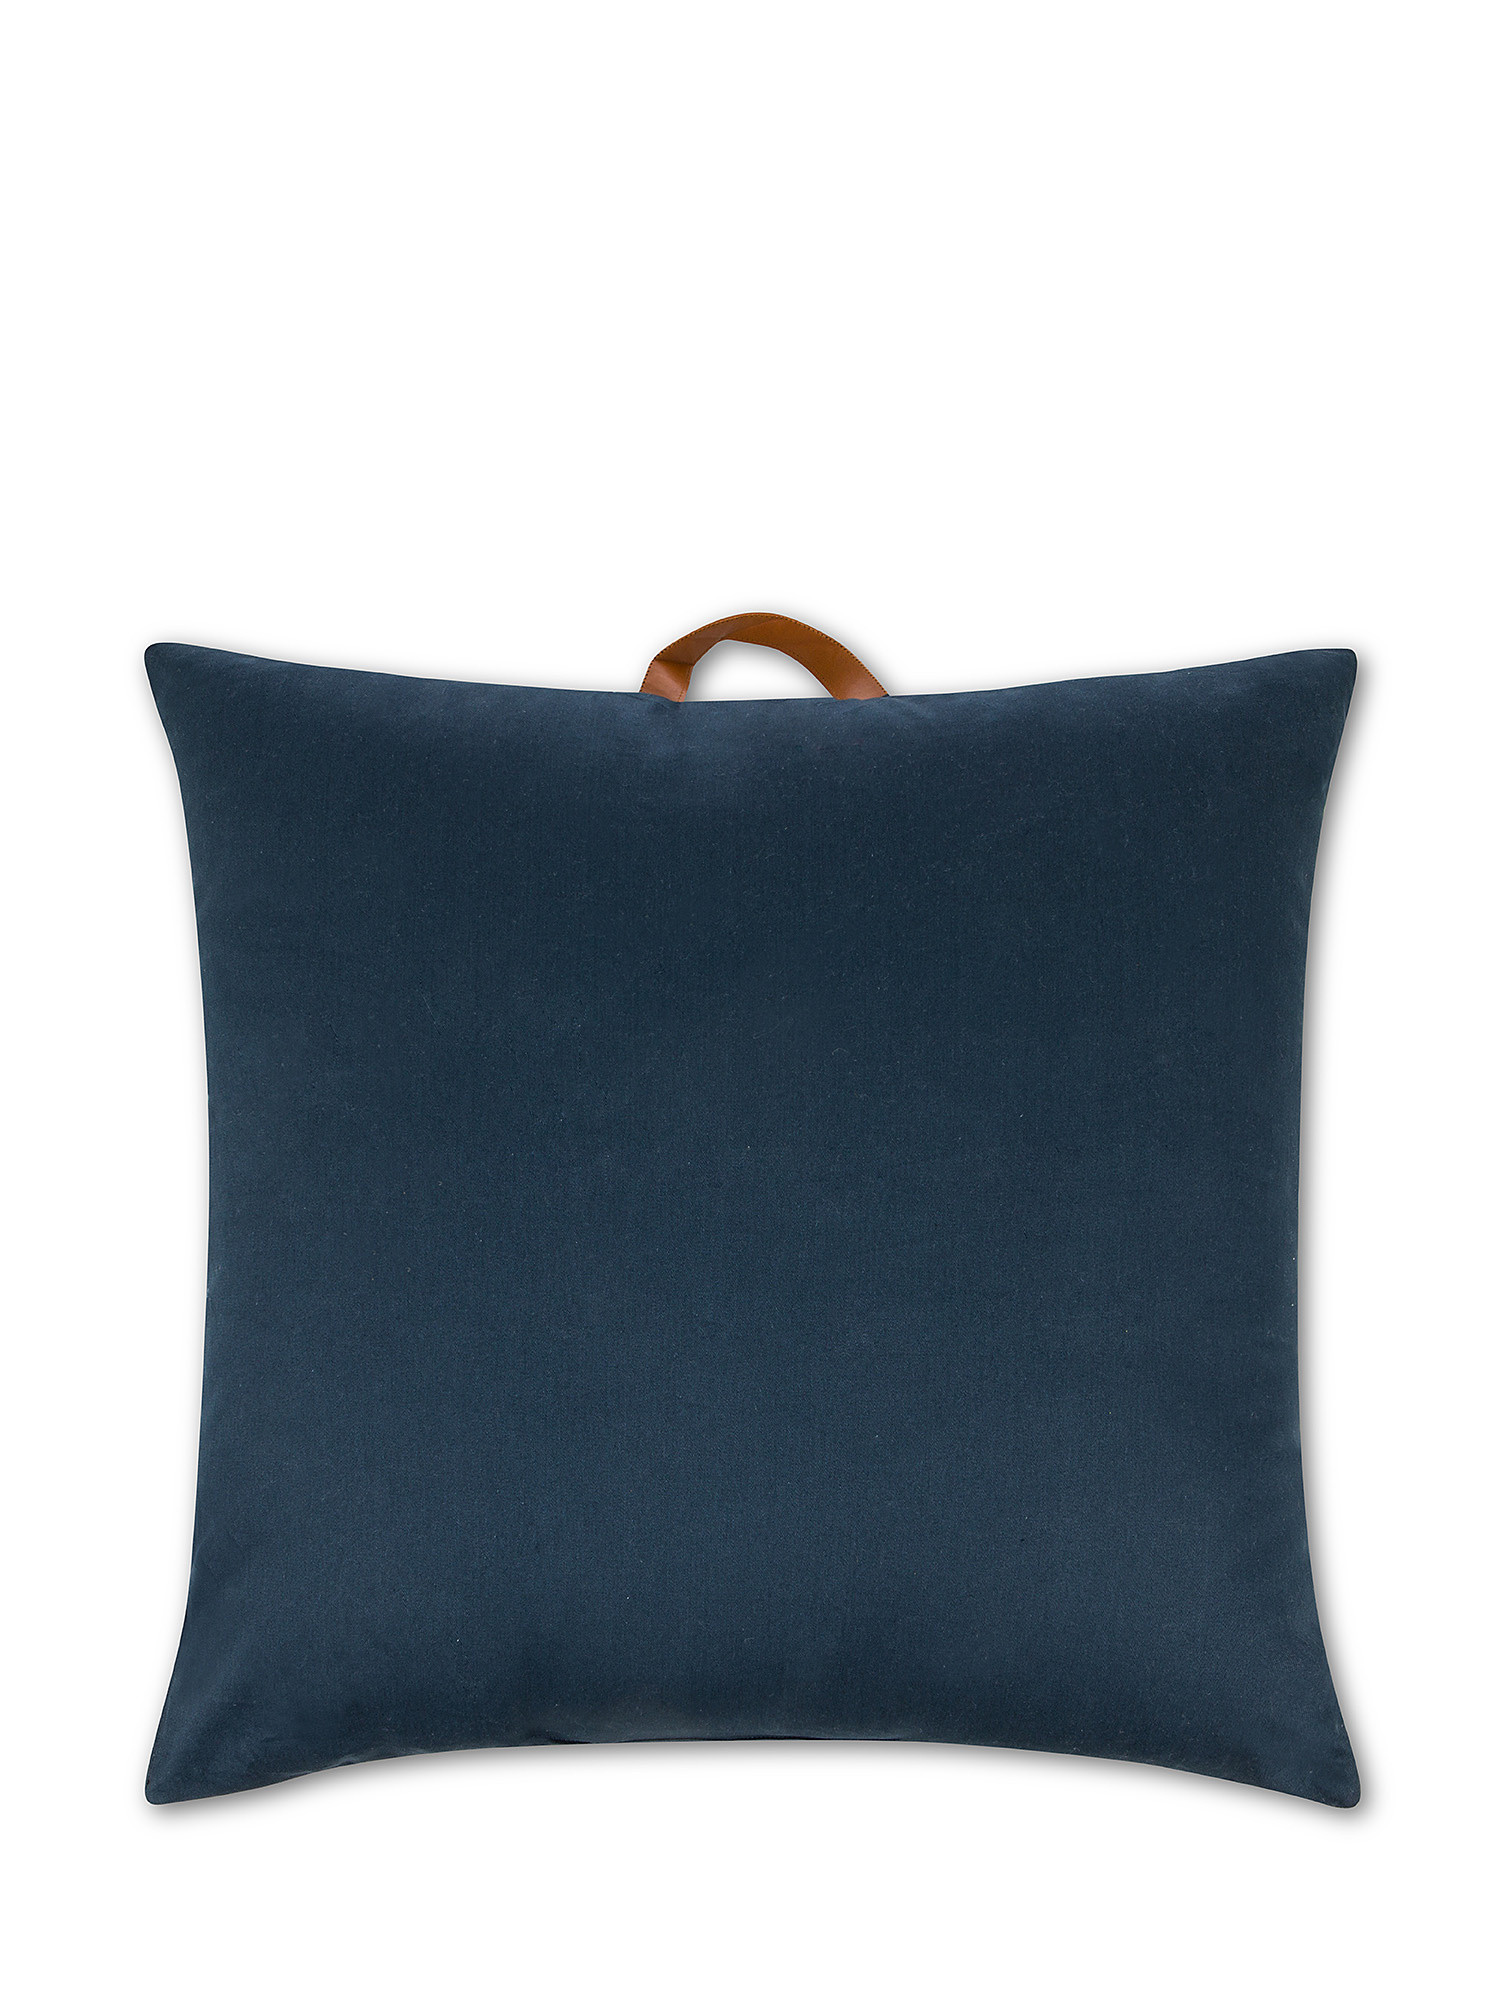 Cushion 70x70 cm with handles, Blue, large image number 1